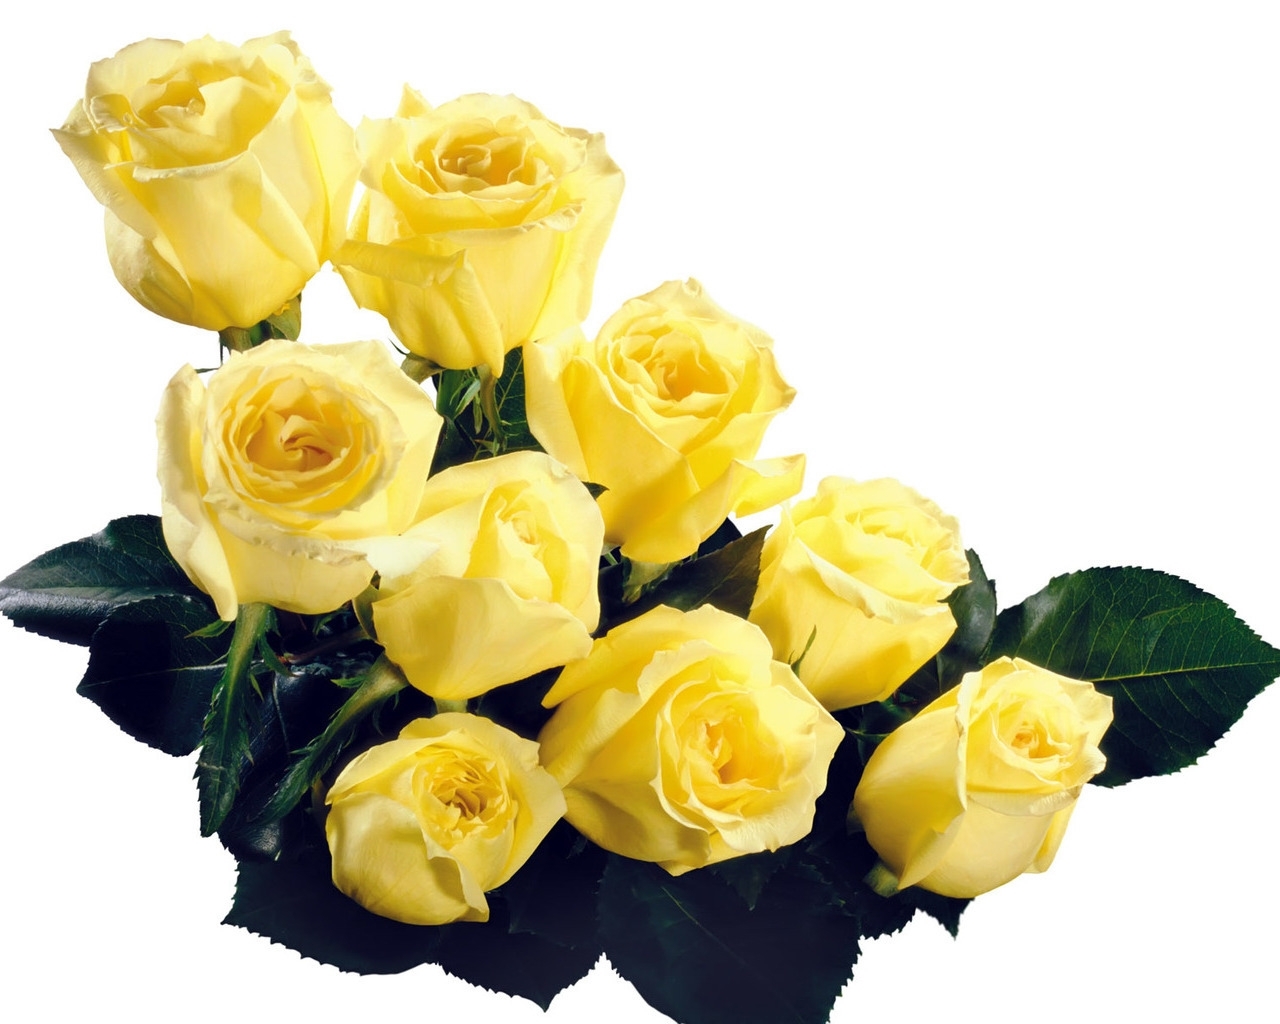 plants, holidays, flowers, roses, postcards, march 8 international women's day (iwd), yellow